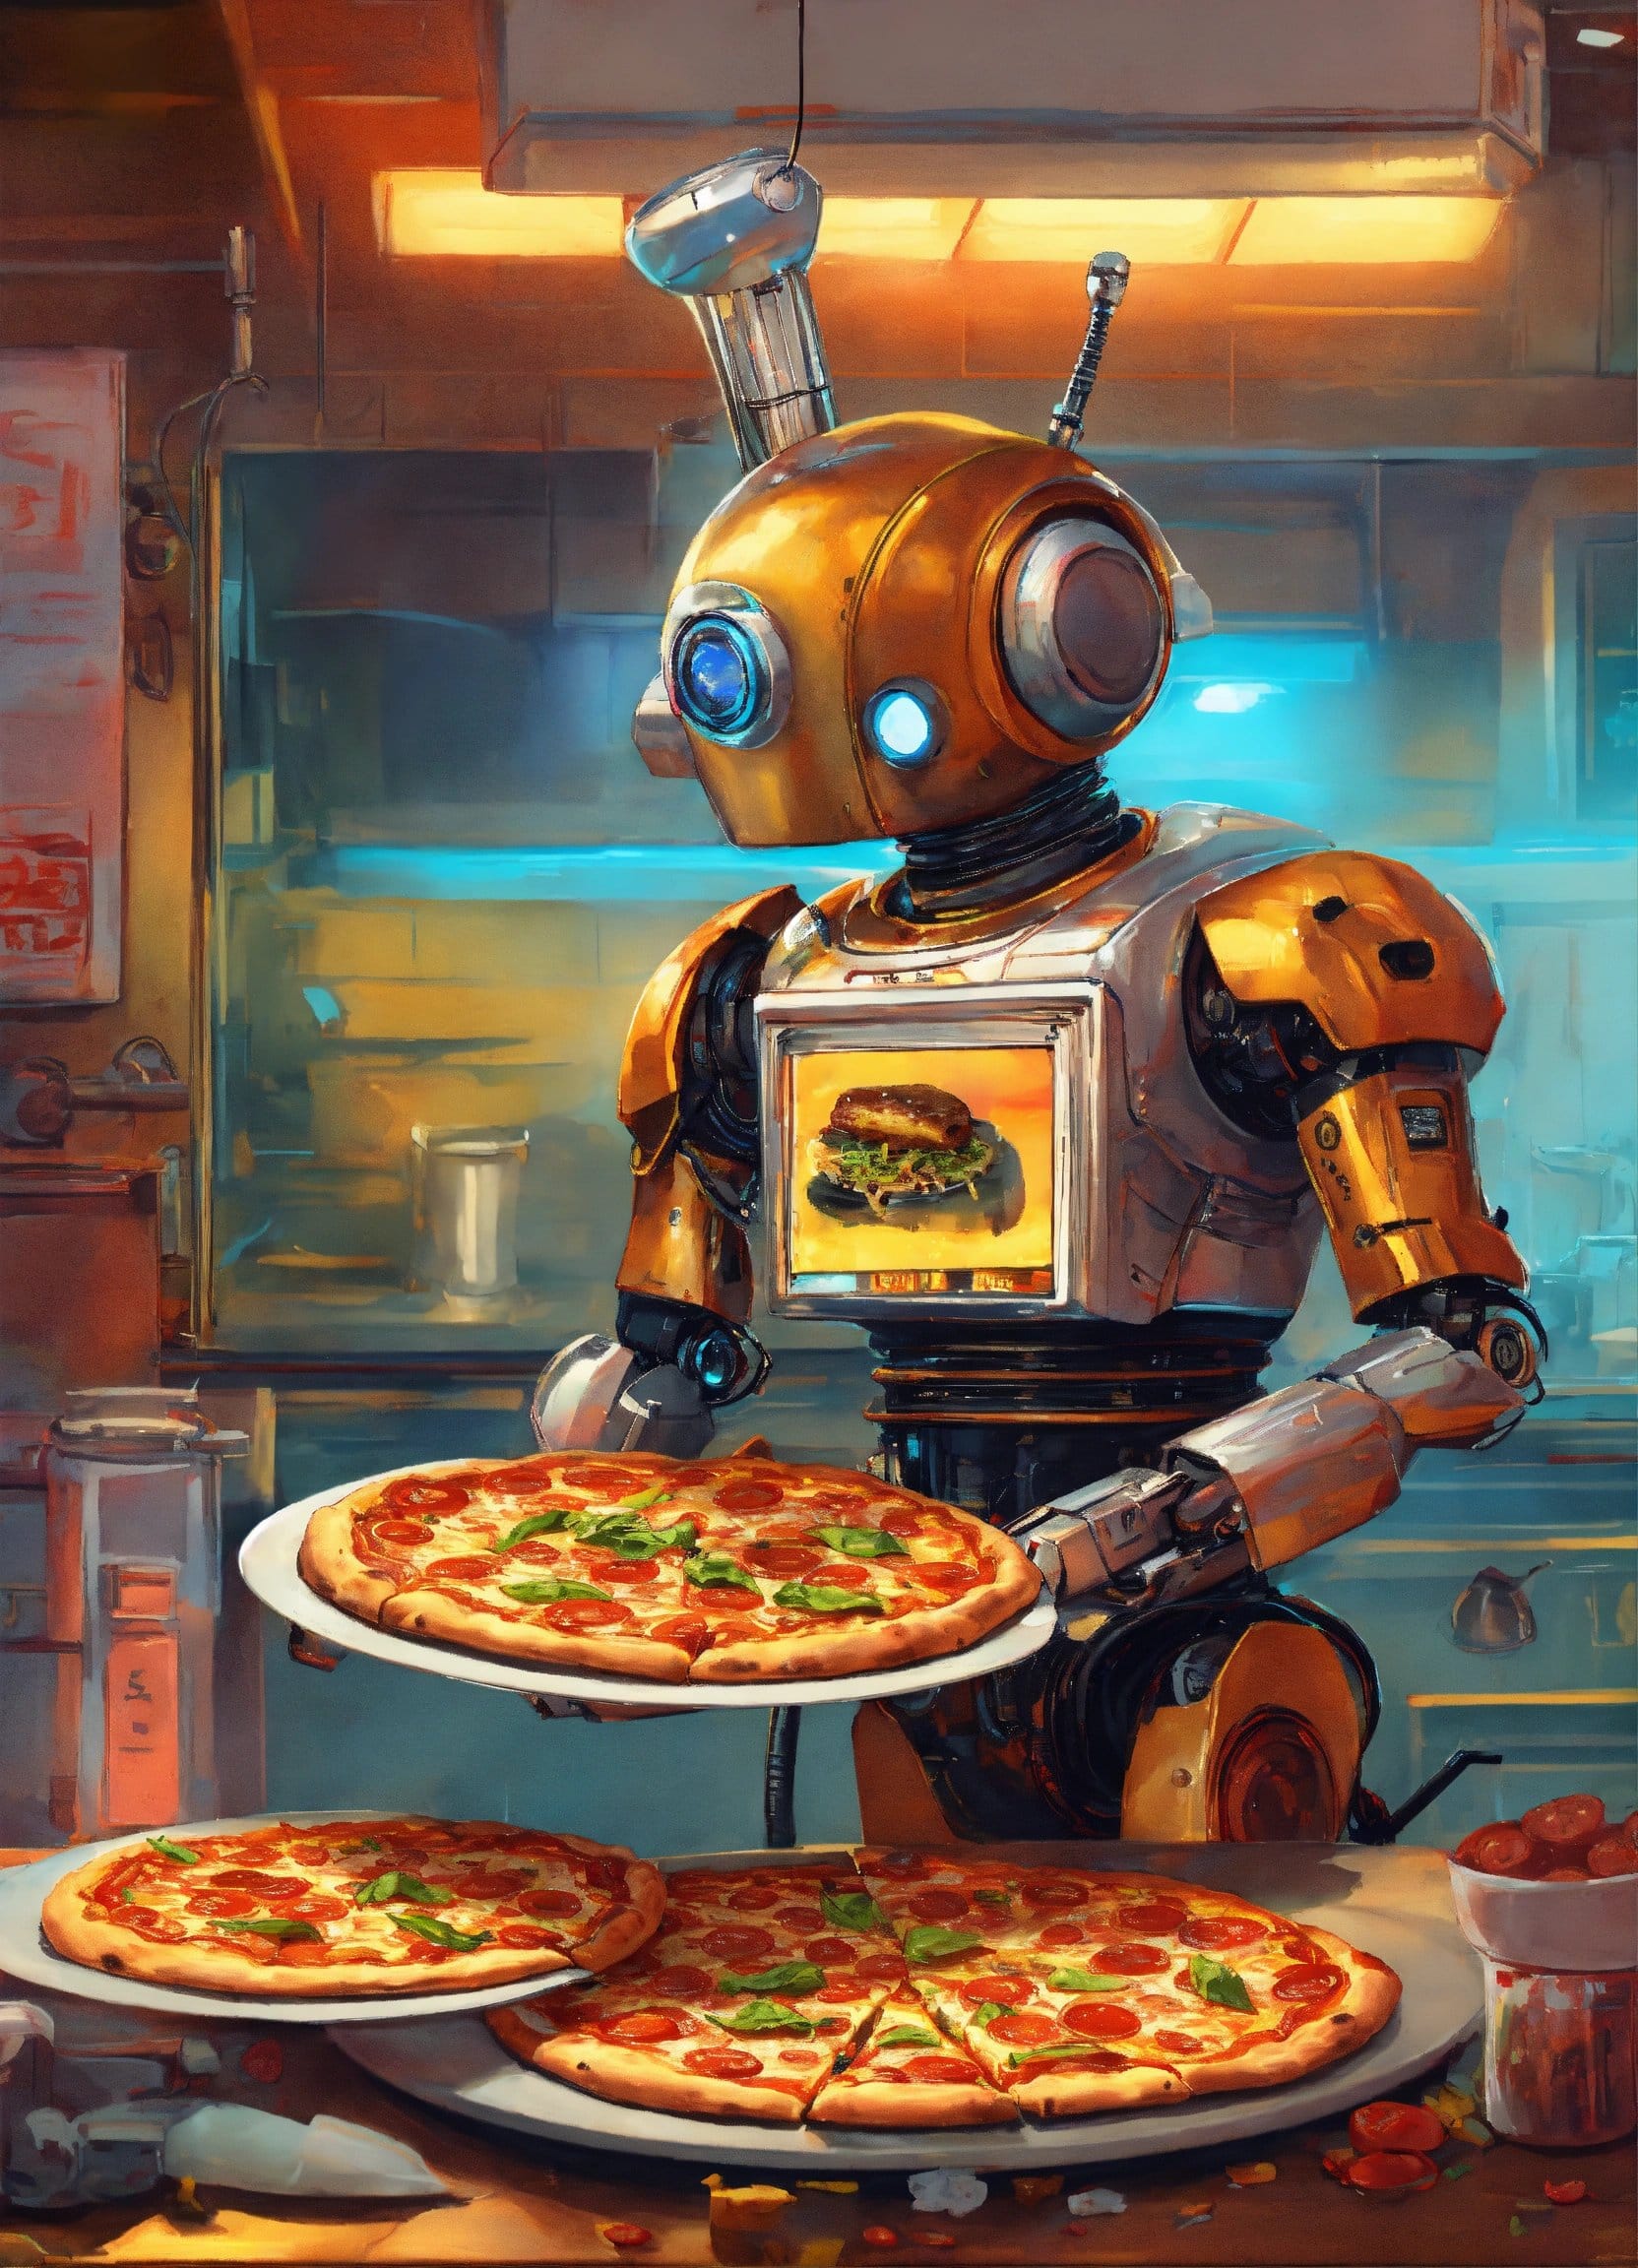 How to start a food business using Robot Waiters and AI Robot Cooks?